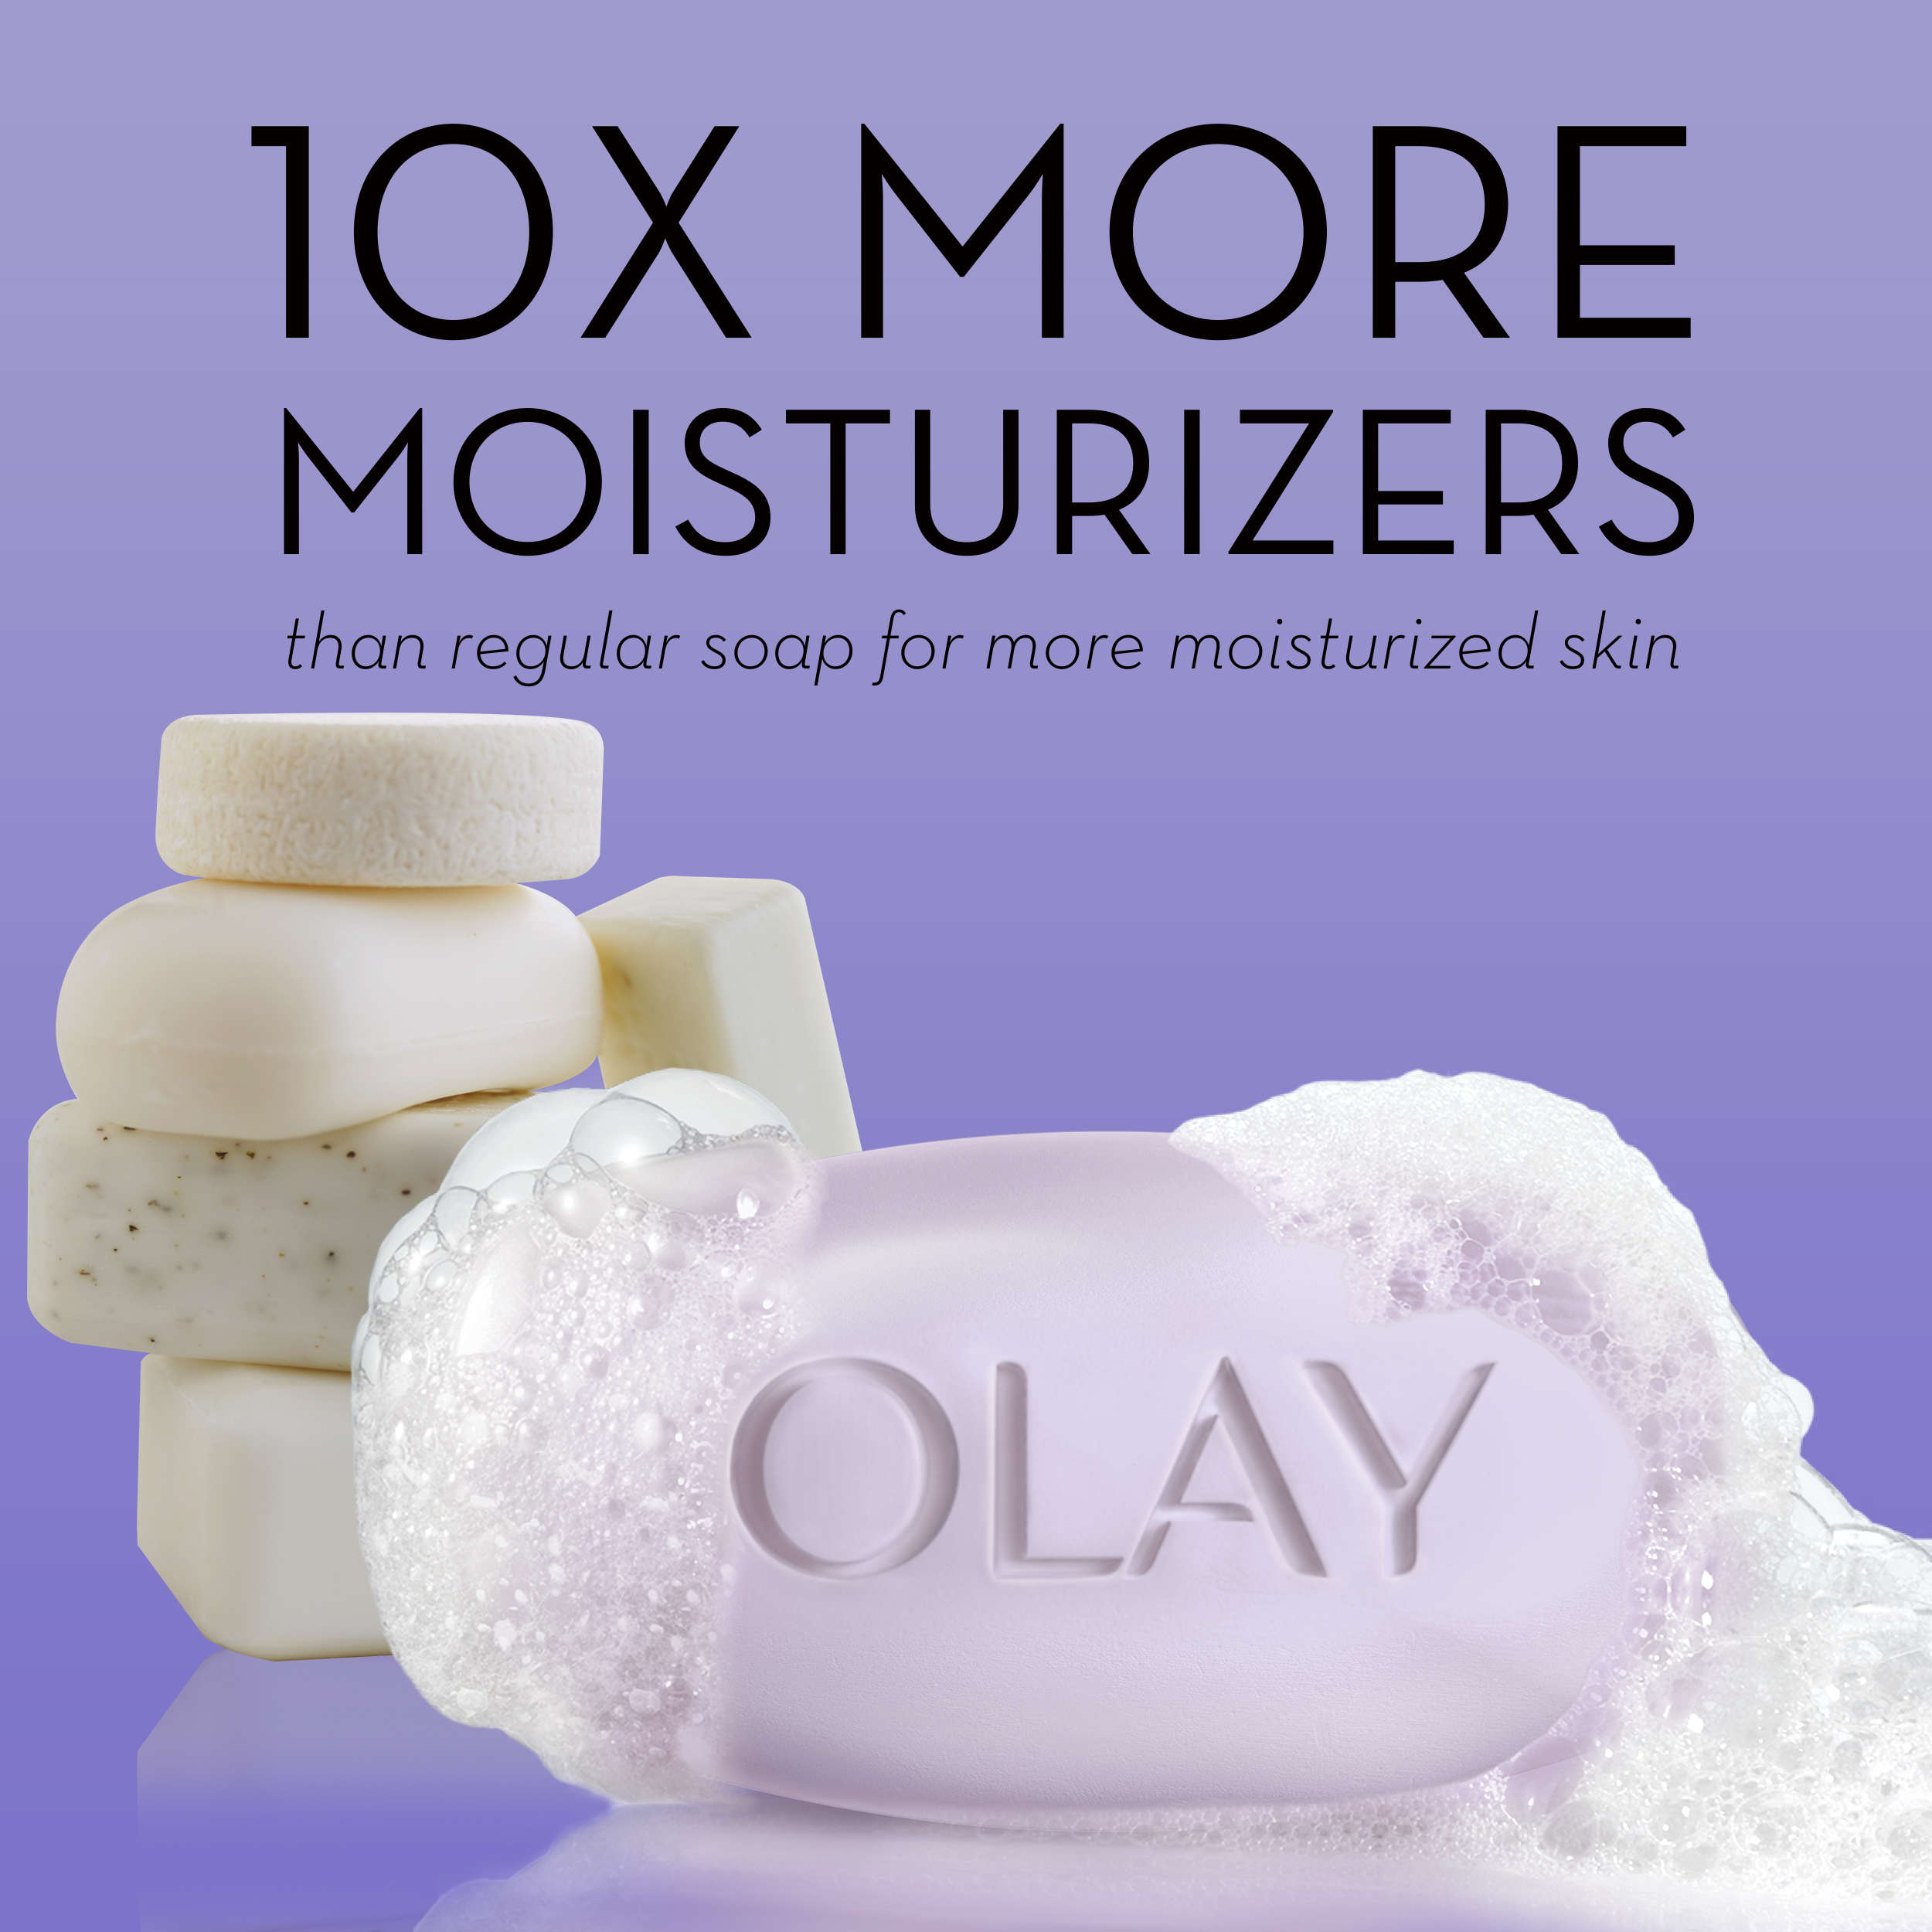 Olay Fresh Outlast Soothing Orchid & Black Currant Beauty Bar 4 oz, 6 count - image 6 of 8